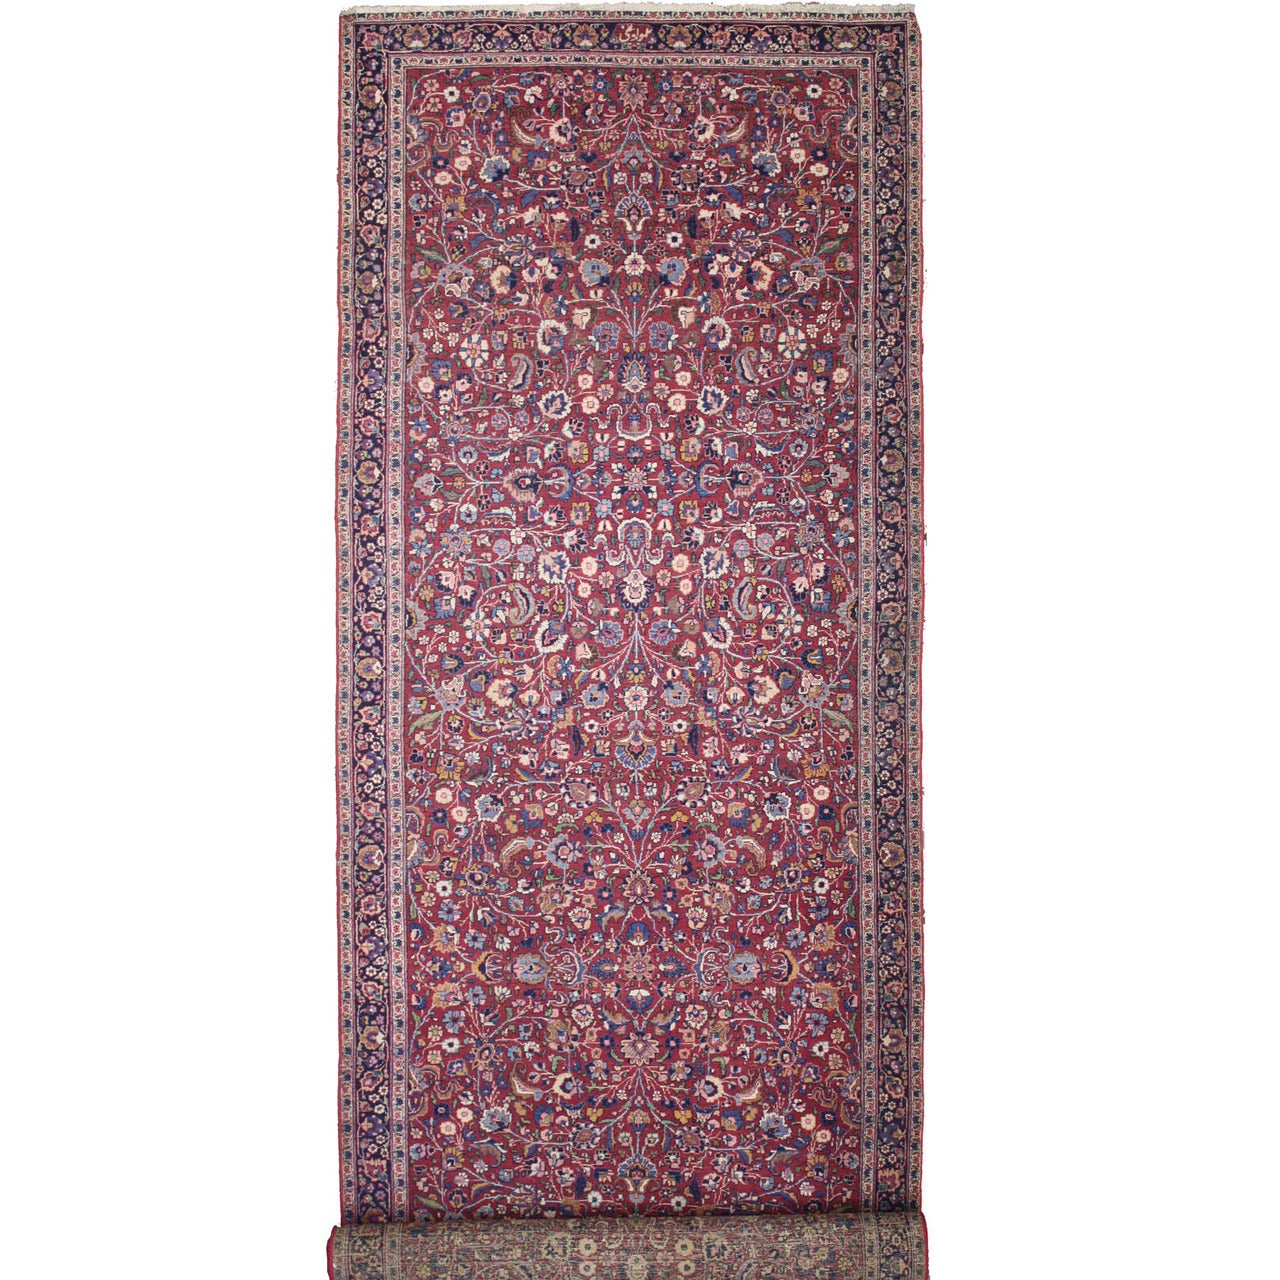 Antique Persian Mashhad Runner with Old World Style, Extra Long Hallway Runner